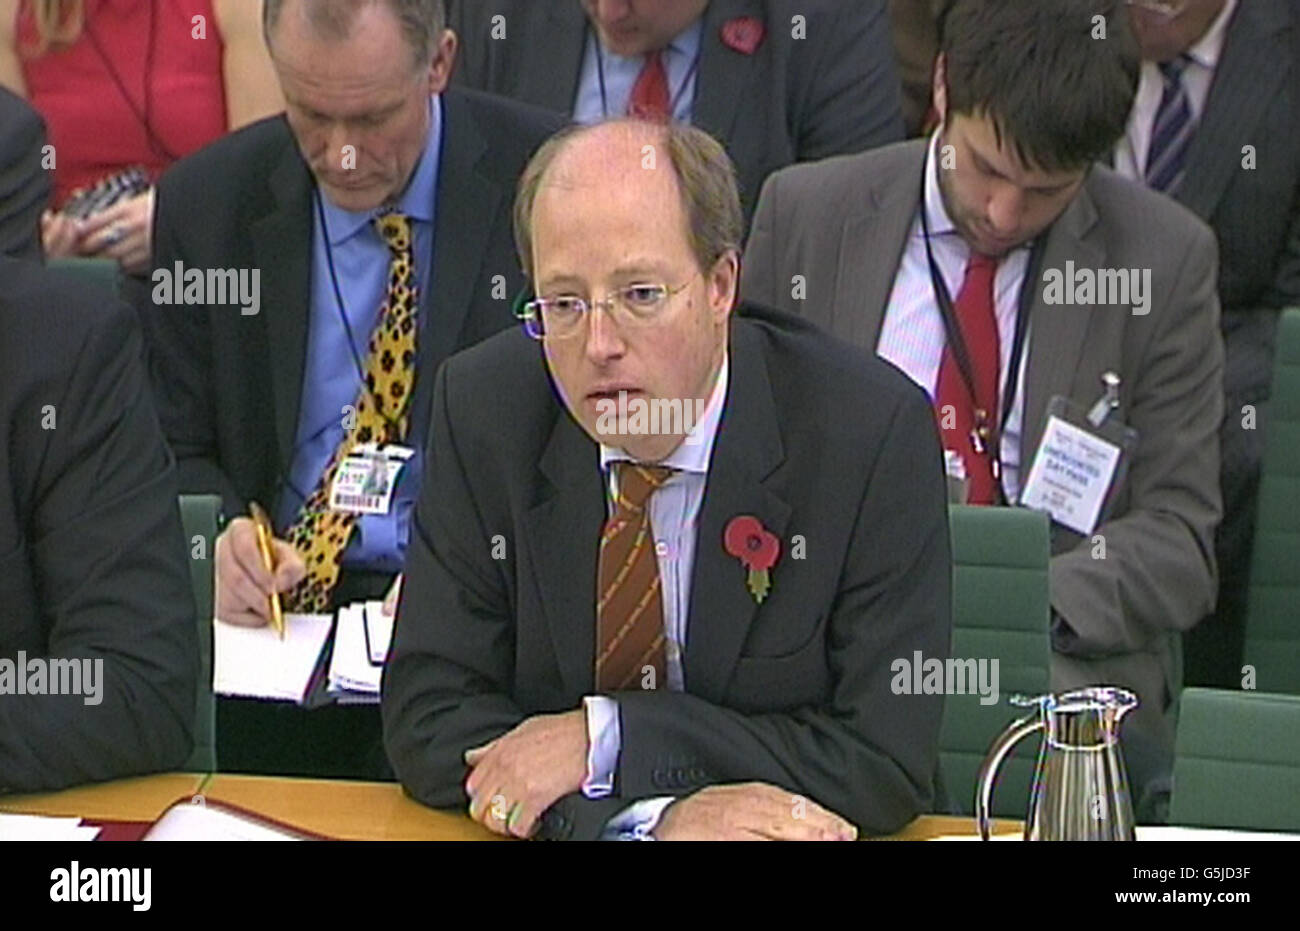 Department for Transport (DfT) permanent secretary Philip Rutnam answers questions at the House of Commons Transport Committee over the fiasco surrounding the West Coast rail franchise. Stock Photo